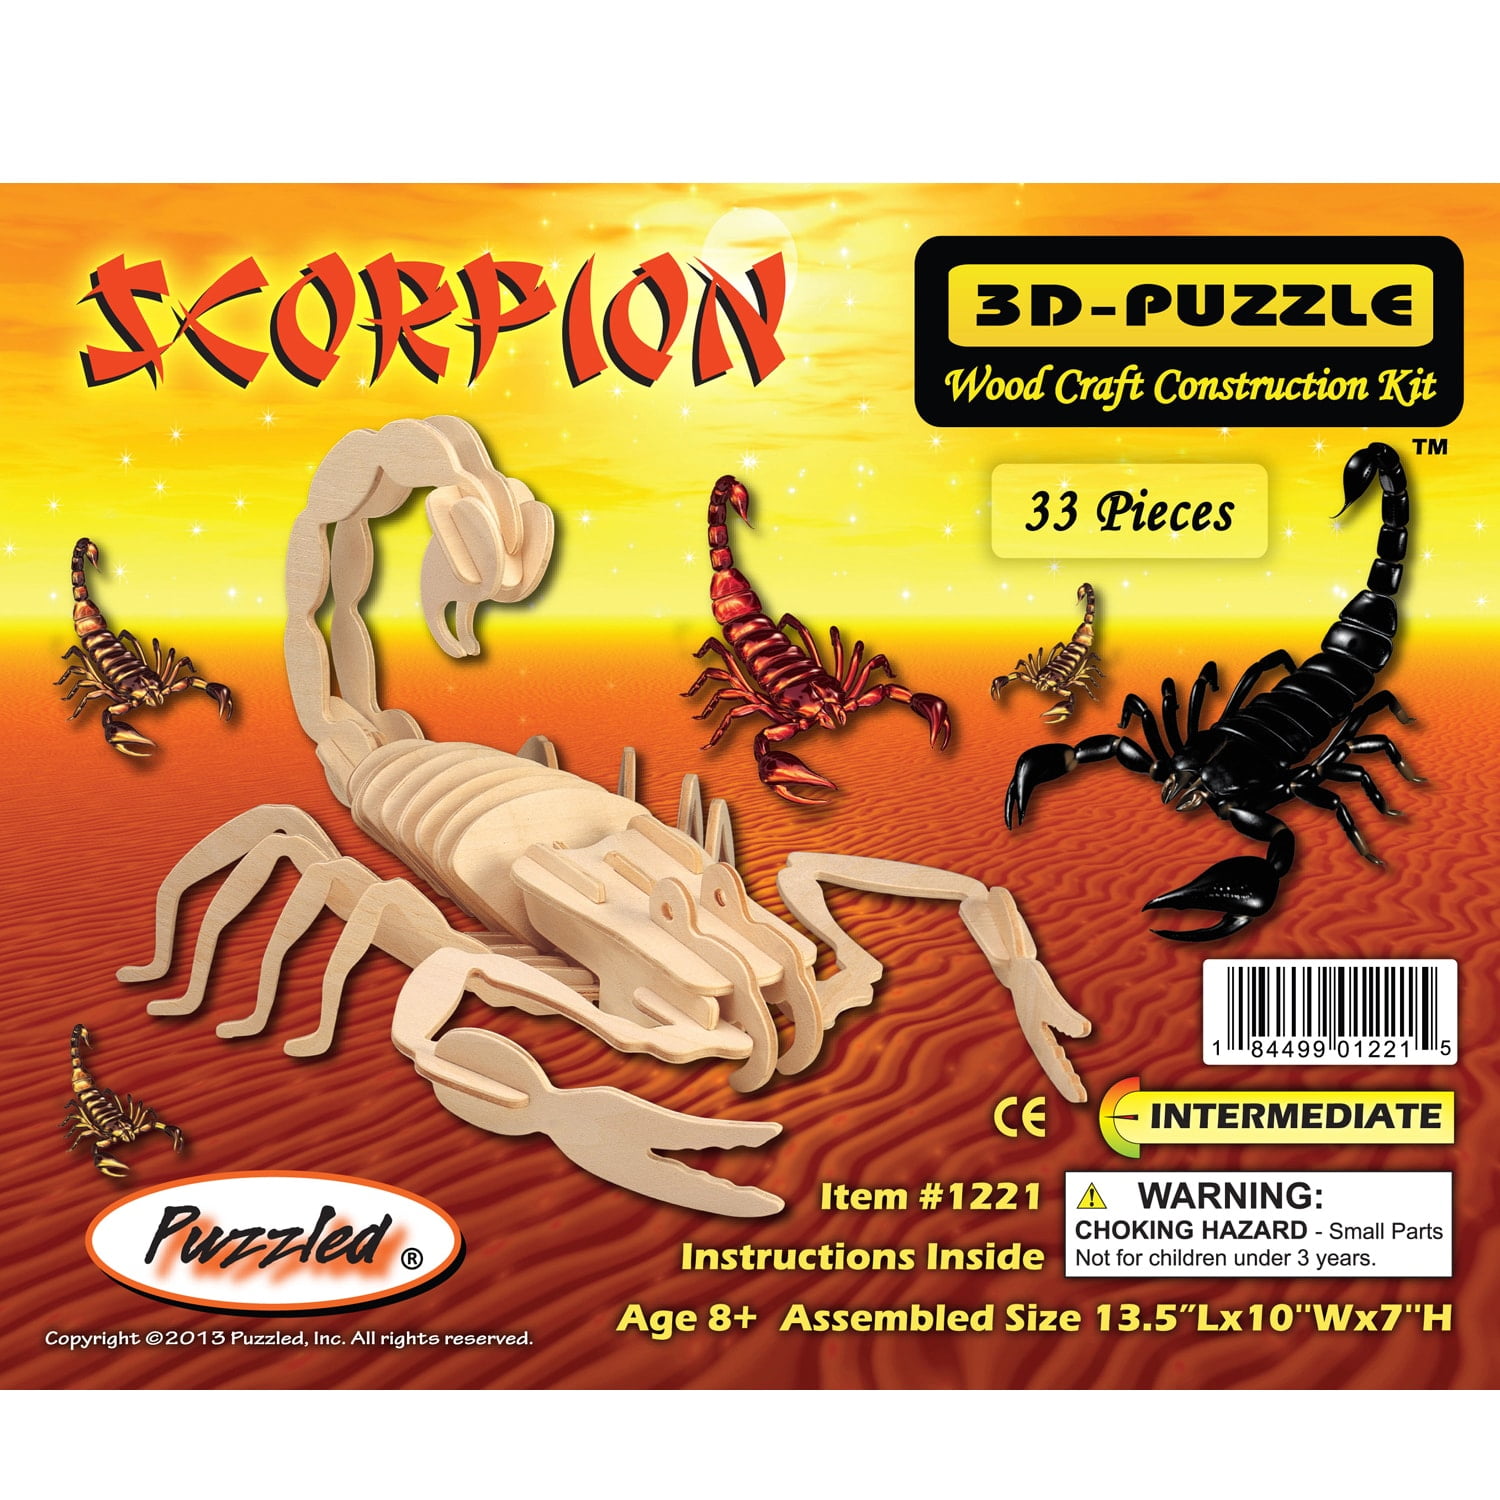 Scorpion 3D Wooden Puzzle DIY 3 Dimensional Wood Build It Yourself Wood Craft 